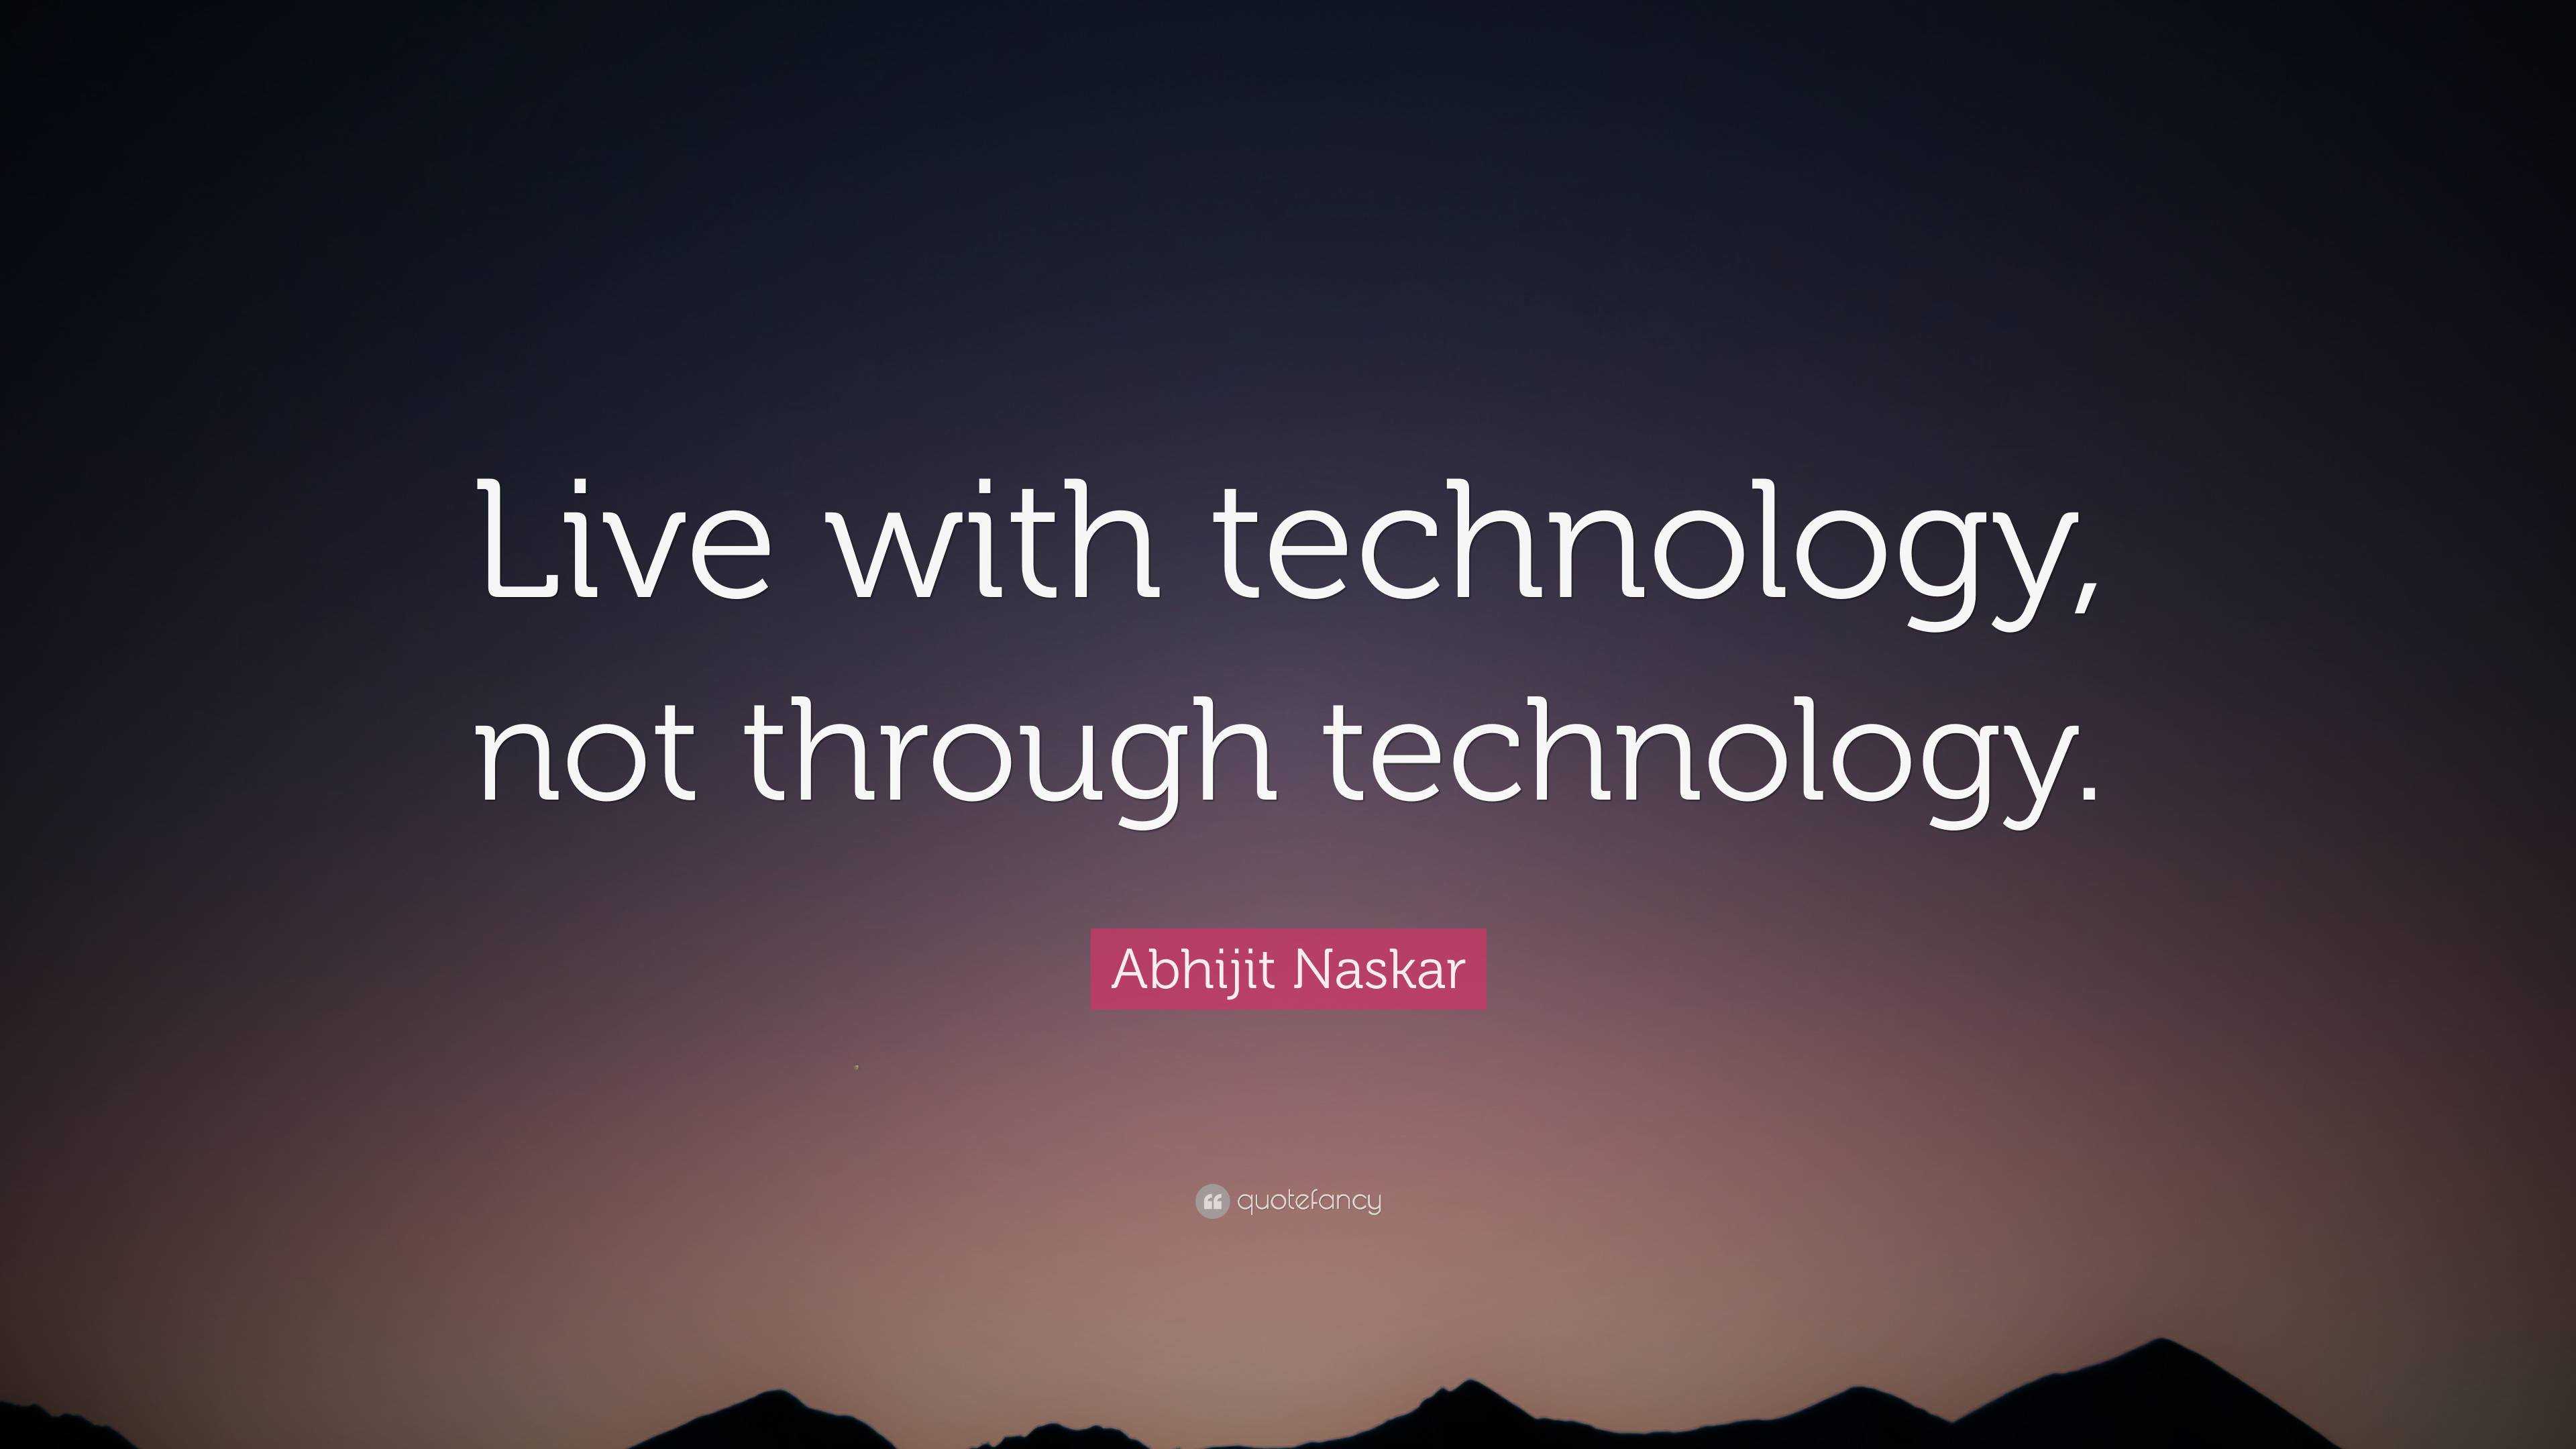 Abhijit Naskar Quote: “Live with technology, not through technology.”